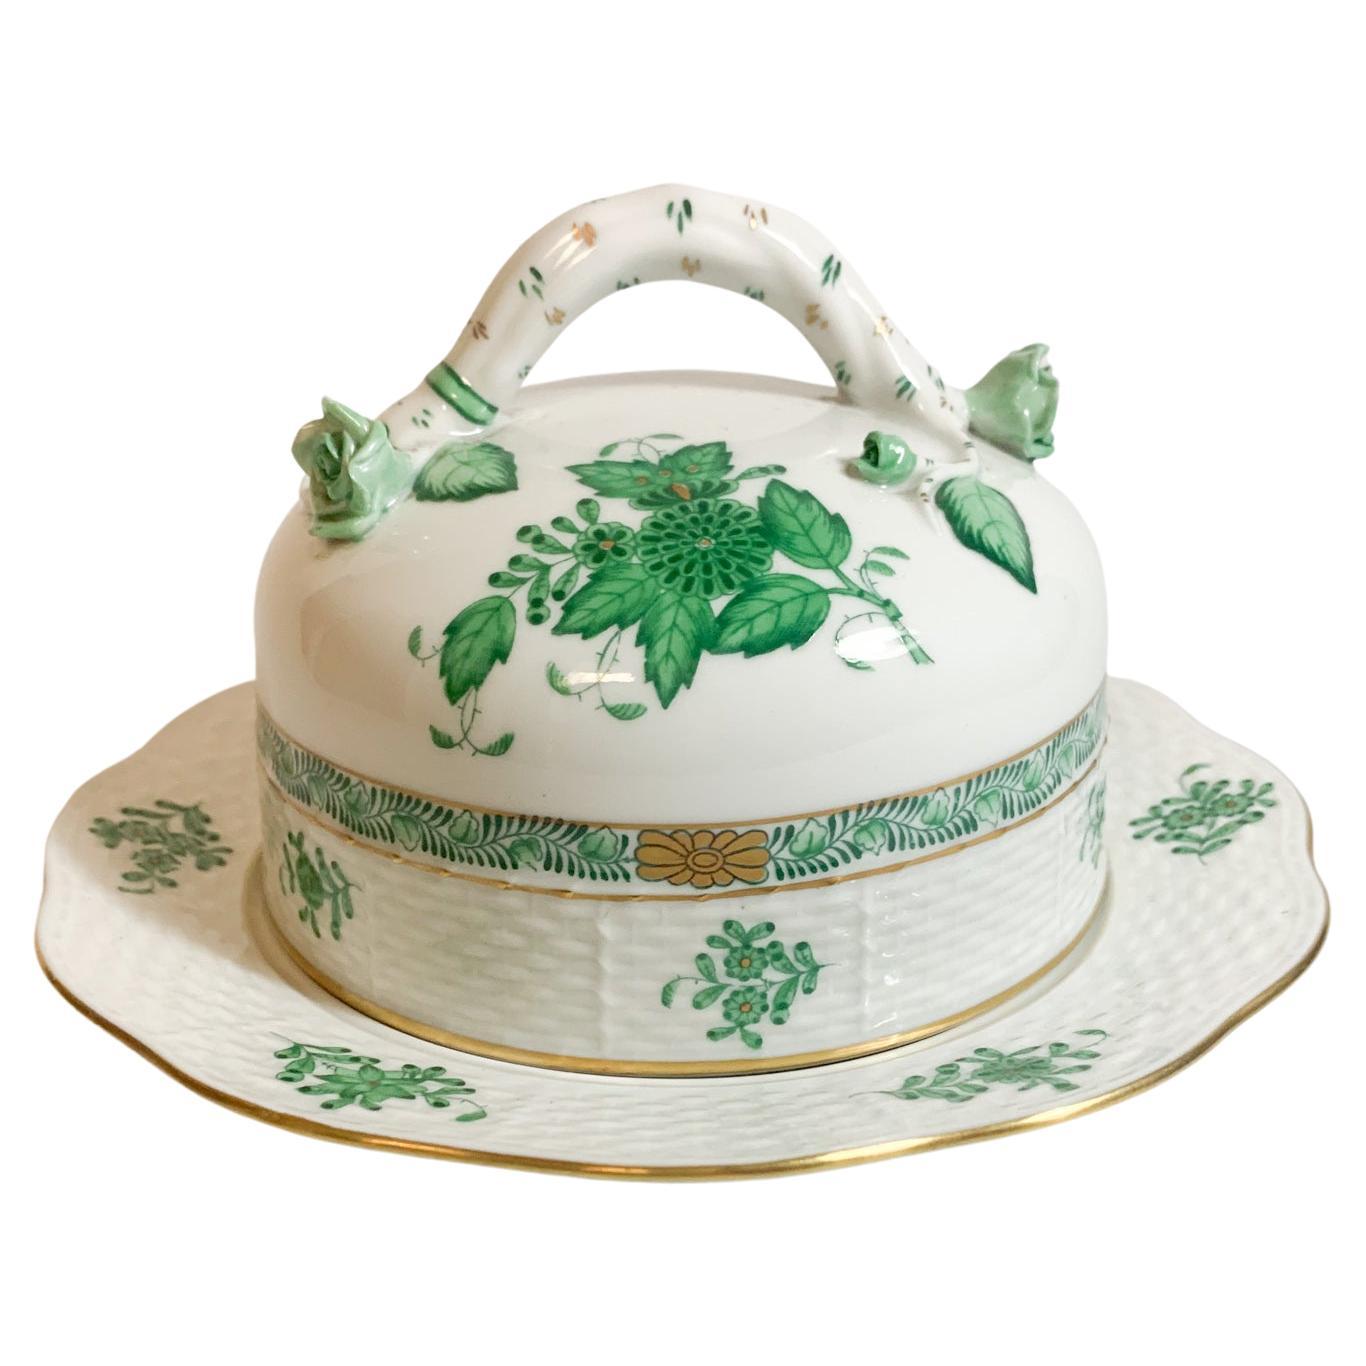 Herend Porcelain Butter Dish with Ivy Pattern from the 1950s